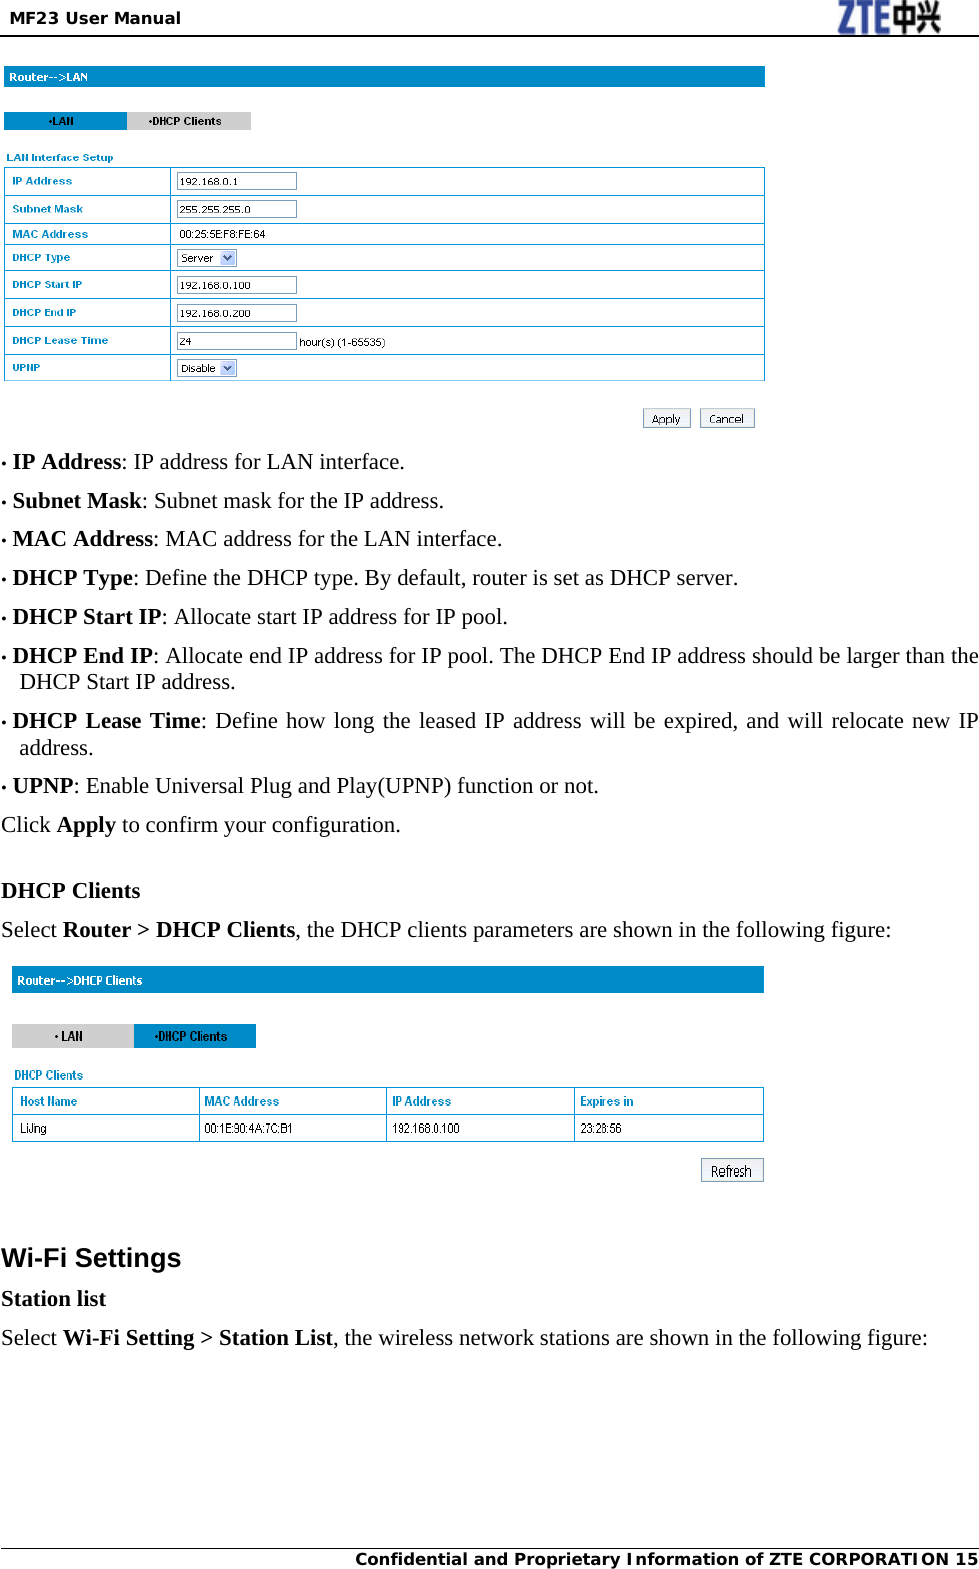  MF23 User Manual Confidential and Proprietary Information of ZTE CORPORATION 15 • IP Address: IP address for LAN interface. • Subnet Mask: Subnet mask for the IP address. • MAC Address: MAC address for the LAN interface. • DHCP Type: Define the DHCP type. By default, router is set as DHCP server. • DHCP Start IP: Allocate start IP address for IP pool. • DHCP End IP: Allocate end IP address for IP pool. The DHCP End IP address should be larger than the DHCP Start IP address. • DHCP Lease Time: Define how long the leased IP address will be expired, and will relocate new IP address. • UPNP: Enable Universal Plug and Play(UPNP) function or not. Click Apply to confirm your configuration.  DHCP Clients Select Router &gt; DHCP Clients, the DHCP clients parameters are shown in the following figure:   Wi-Fi Settings Station list Select Wi-Fi Setting &gt; Station List, the wireless network stations are shown in the following figure: 